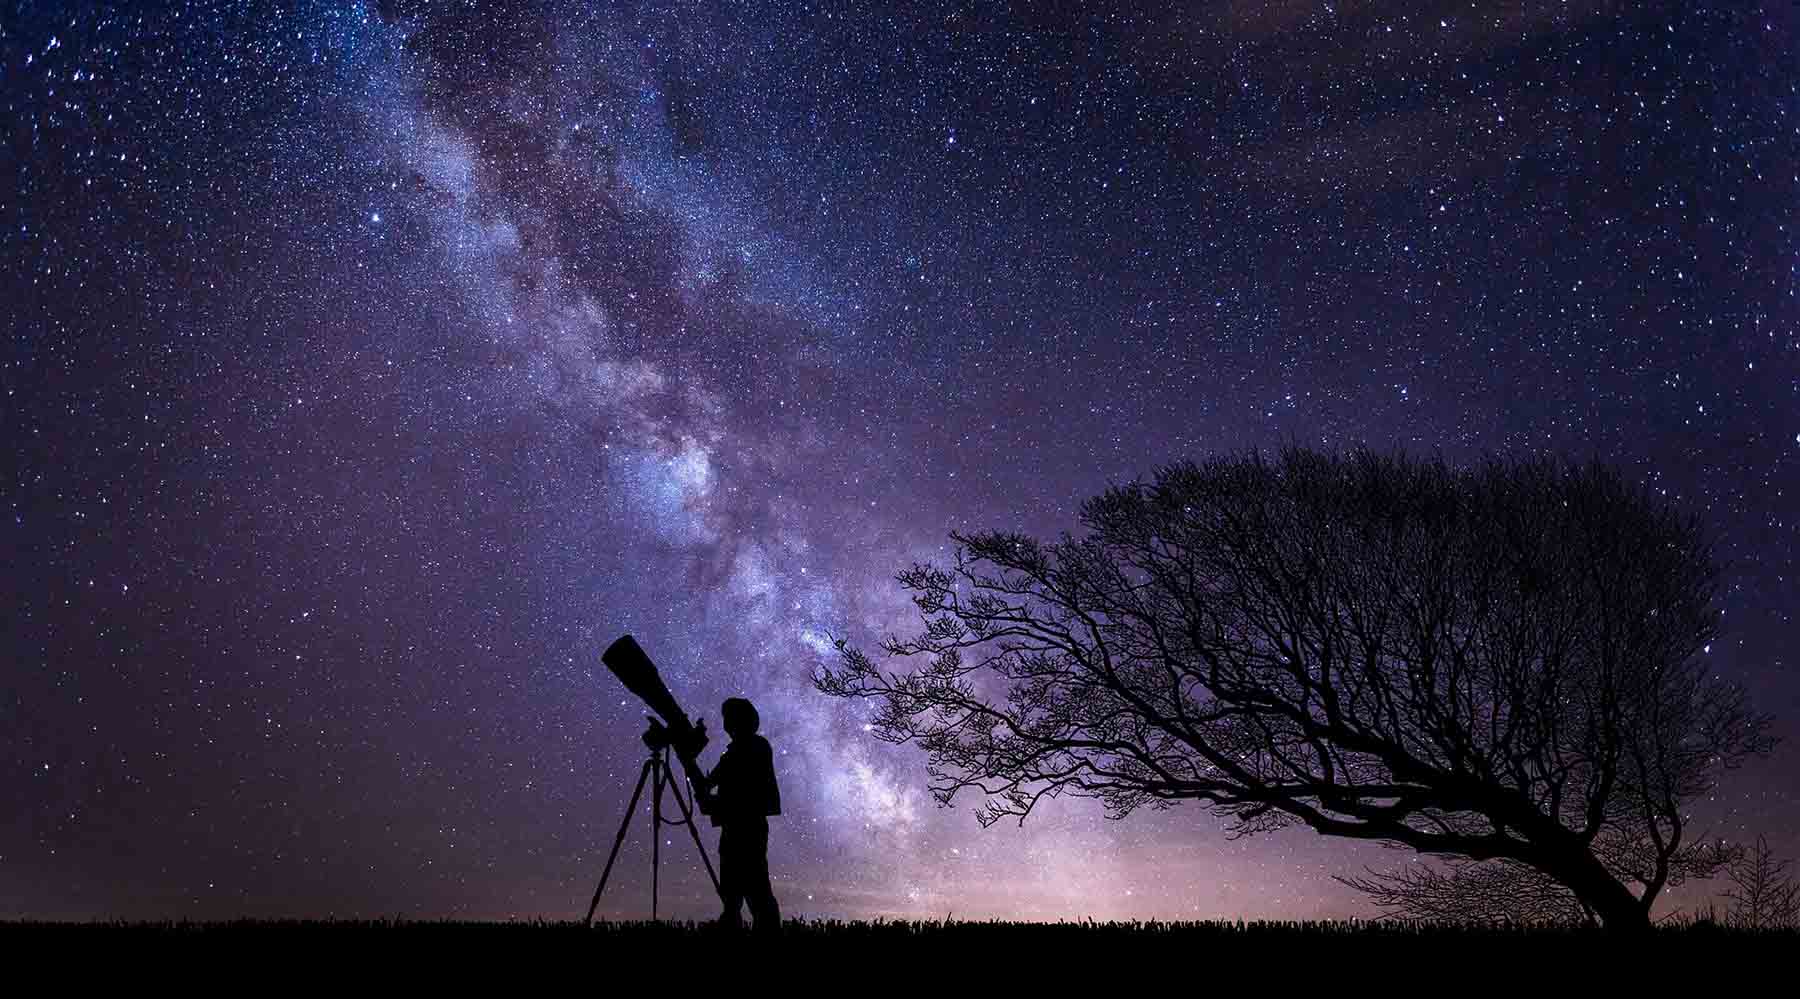 Silhouette of a person using a telescope under a starry night sky with the Milky Way visible, beside a leafless tree in a dark field